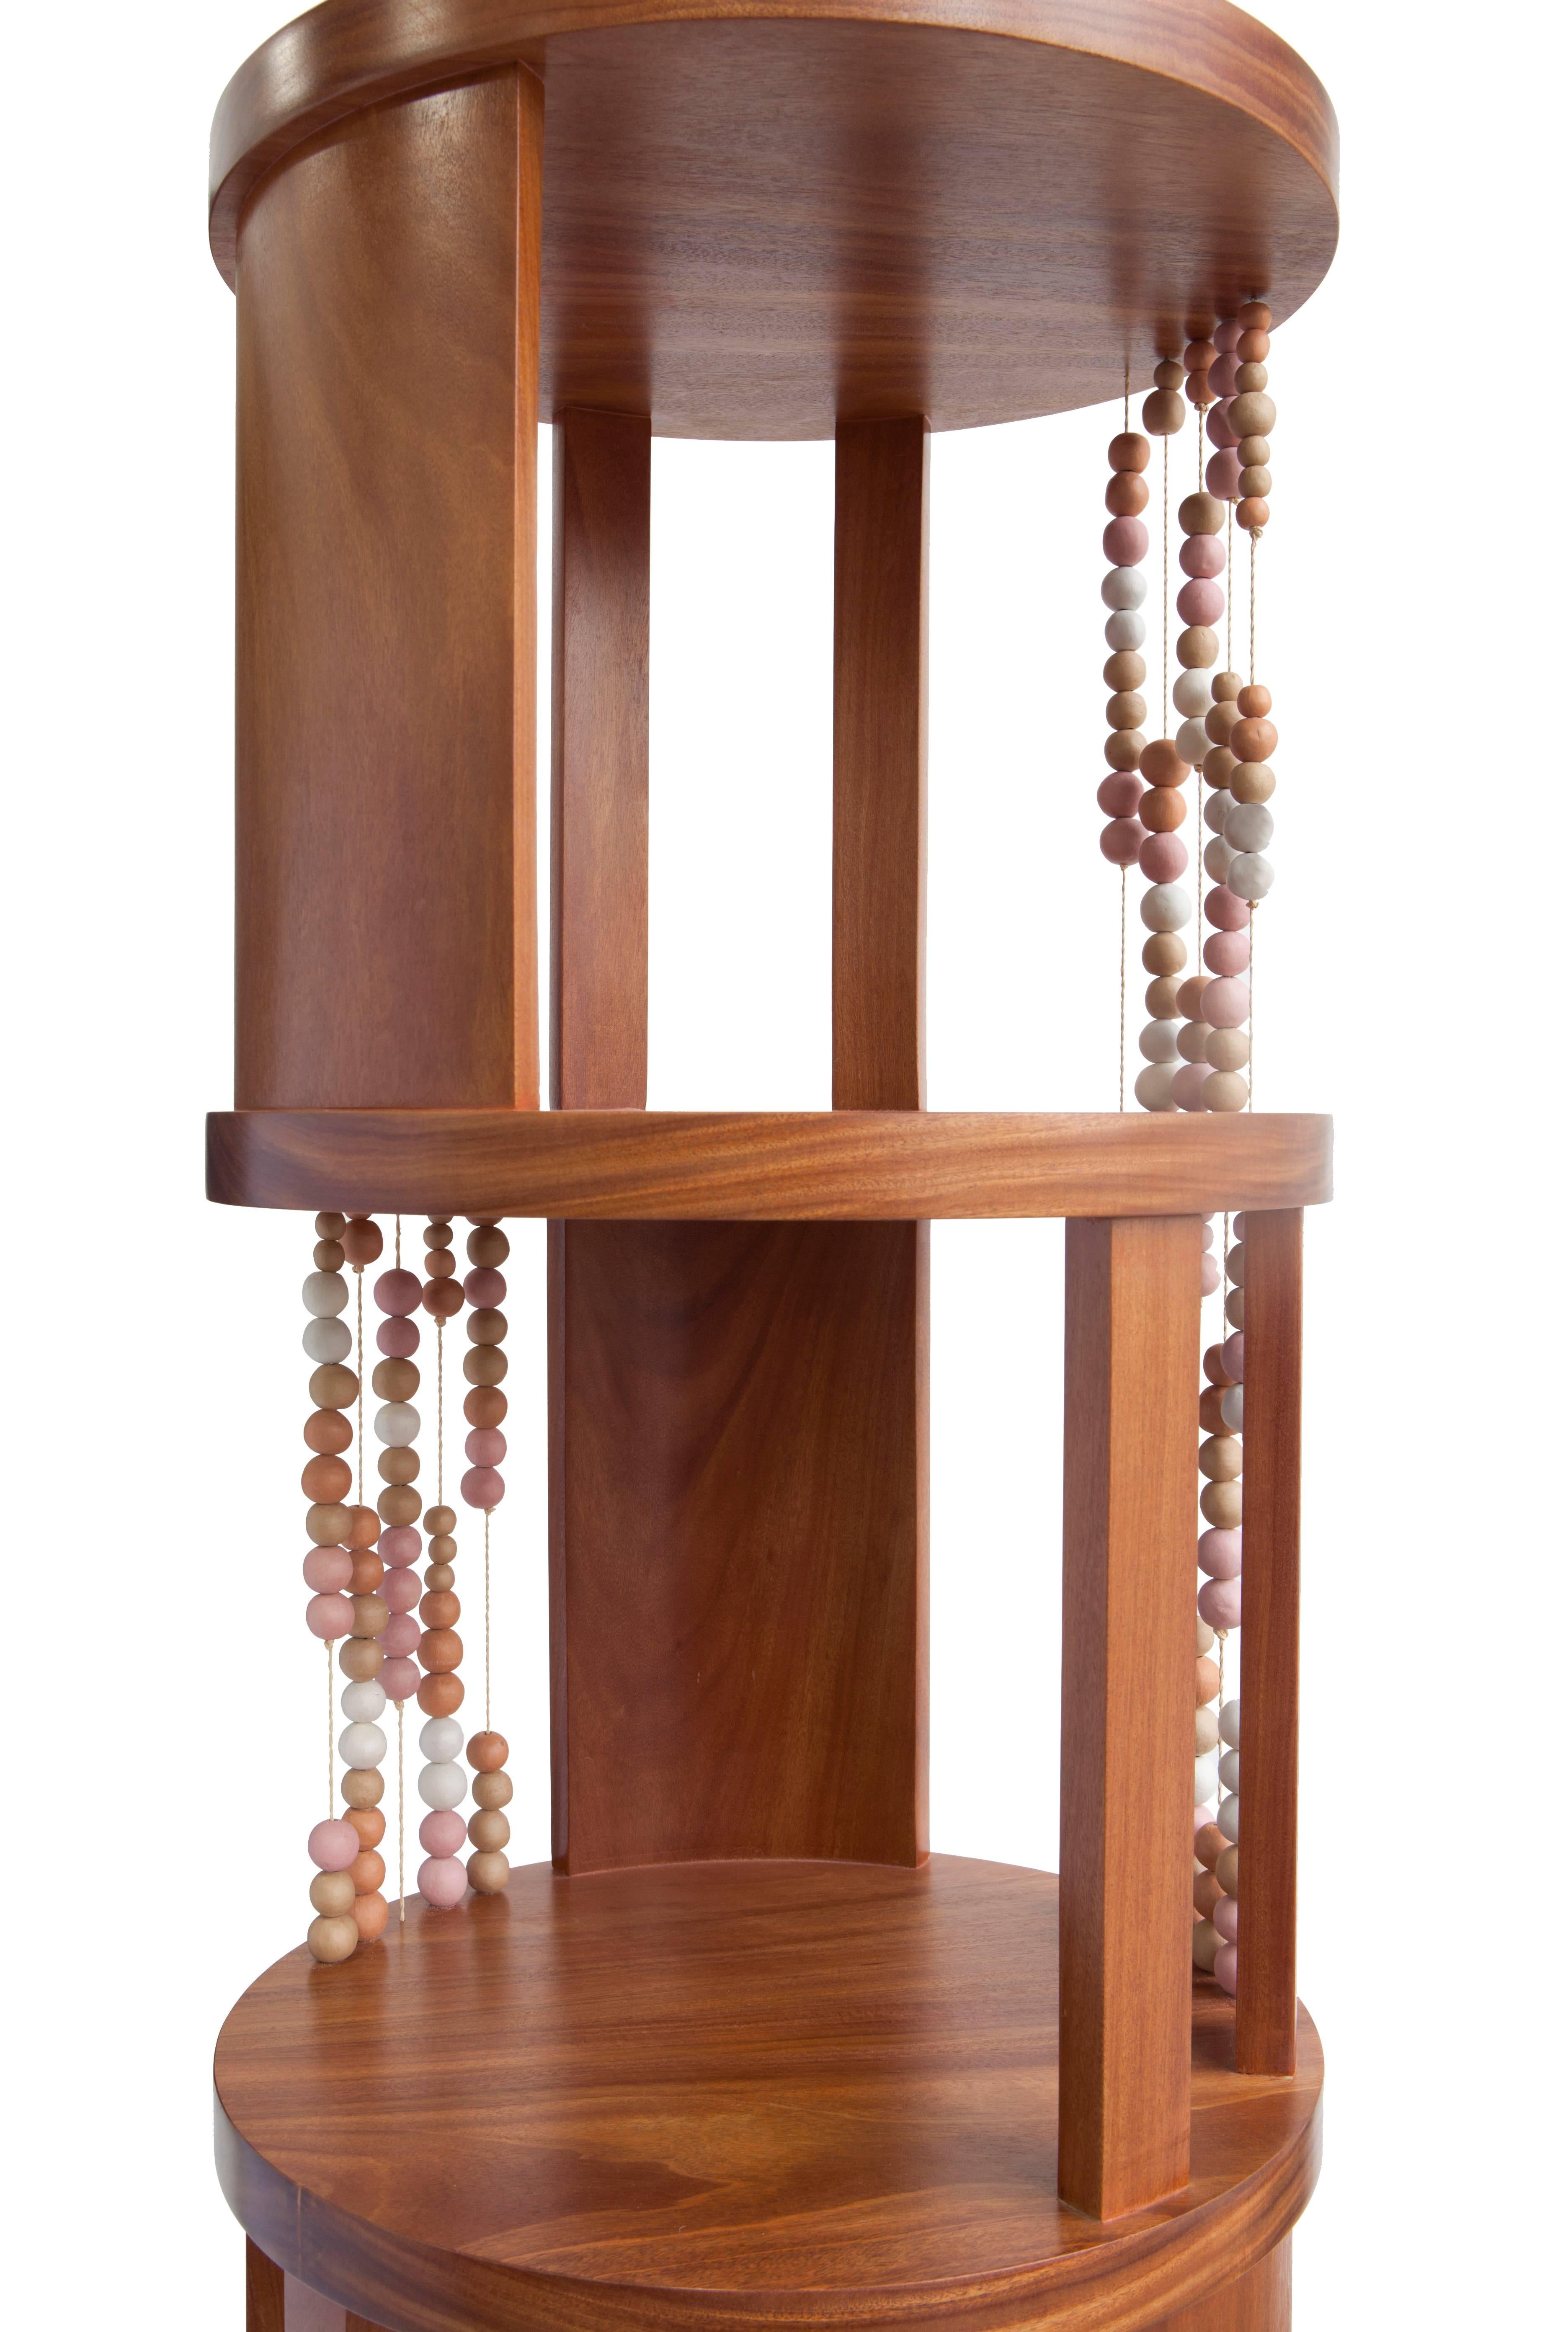 All the levels of this round bookcase, made of cabreuva hardwood, are permeated by buriti palms yarns with ceramic beads, creating different compositions depending on the angle we look at. All the soft colored shades of the ceramic come from the